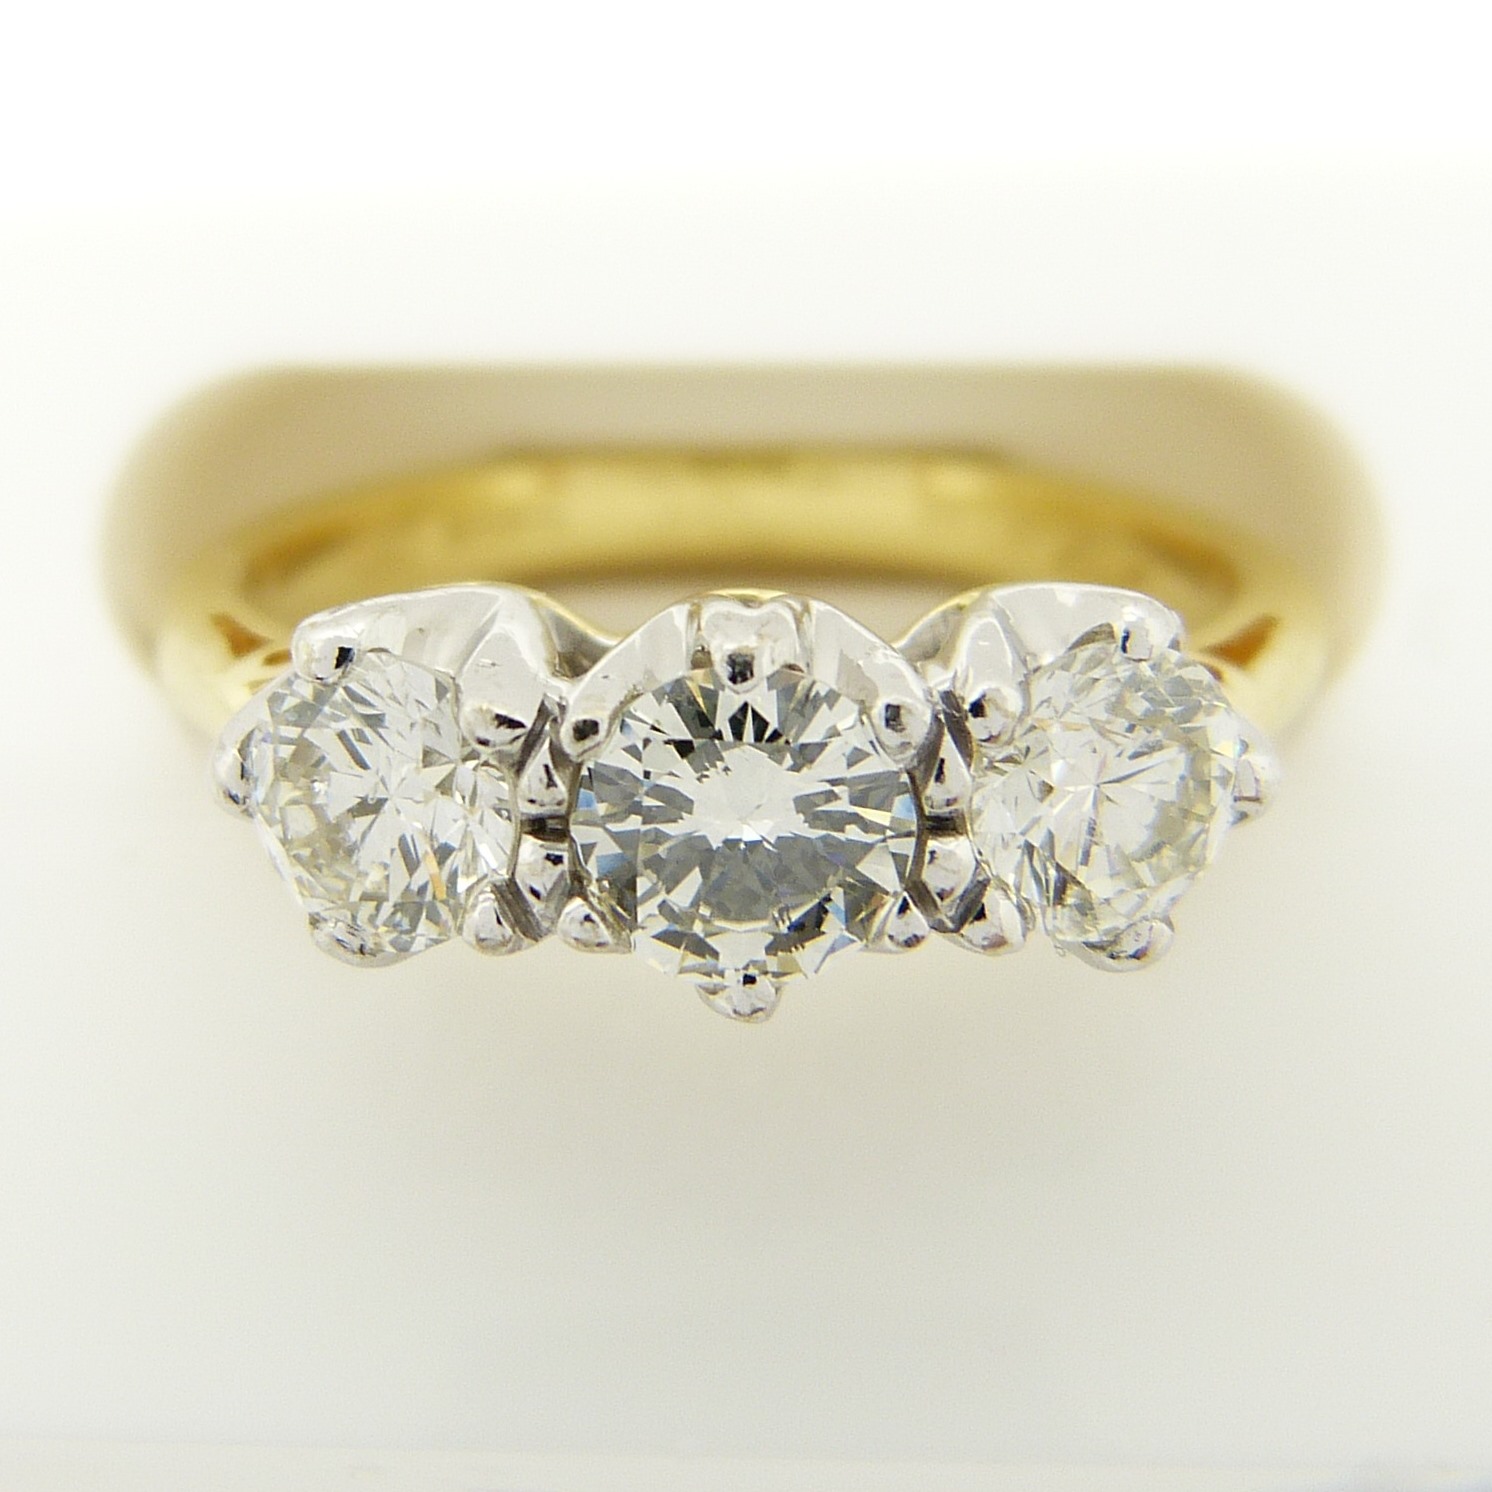 A certificated 0.95 carat diamond trilogy ring in 18ct white and yellow gold